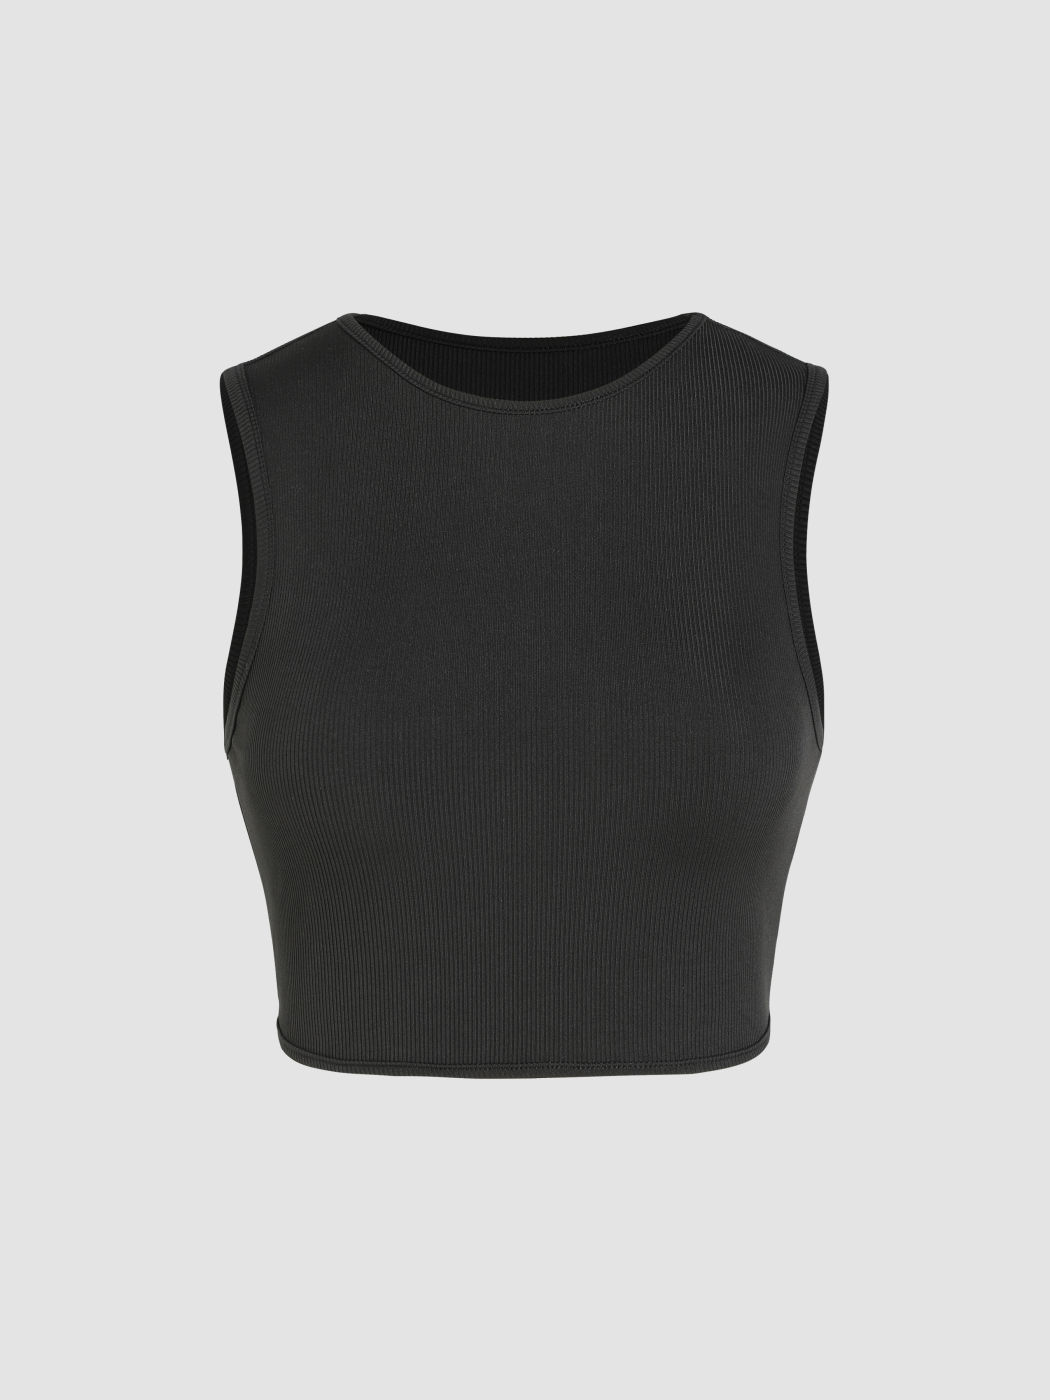 Solid Sleeveless Crop Top For Daily Casual